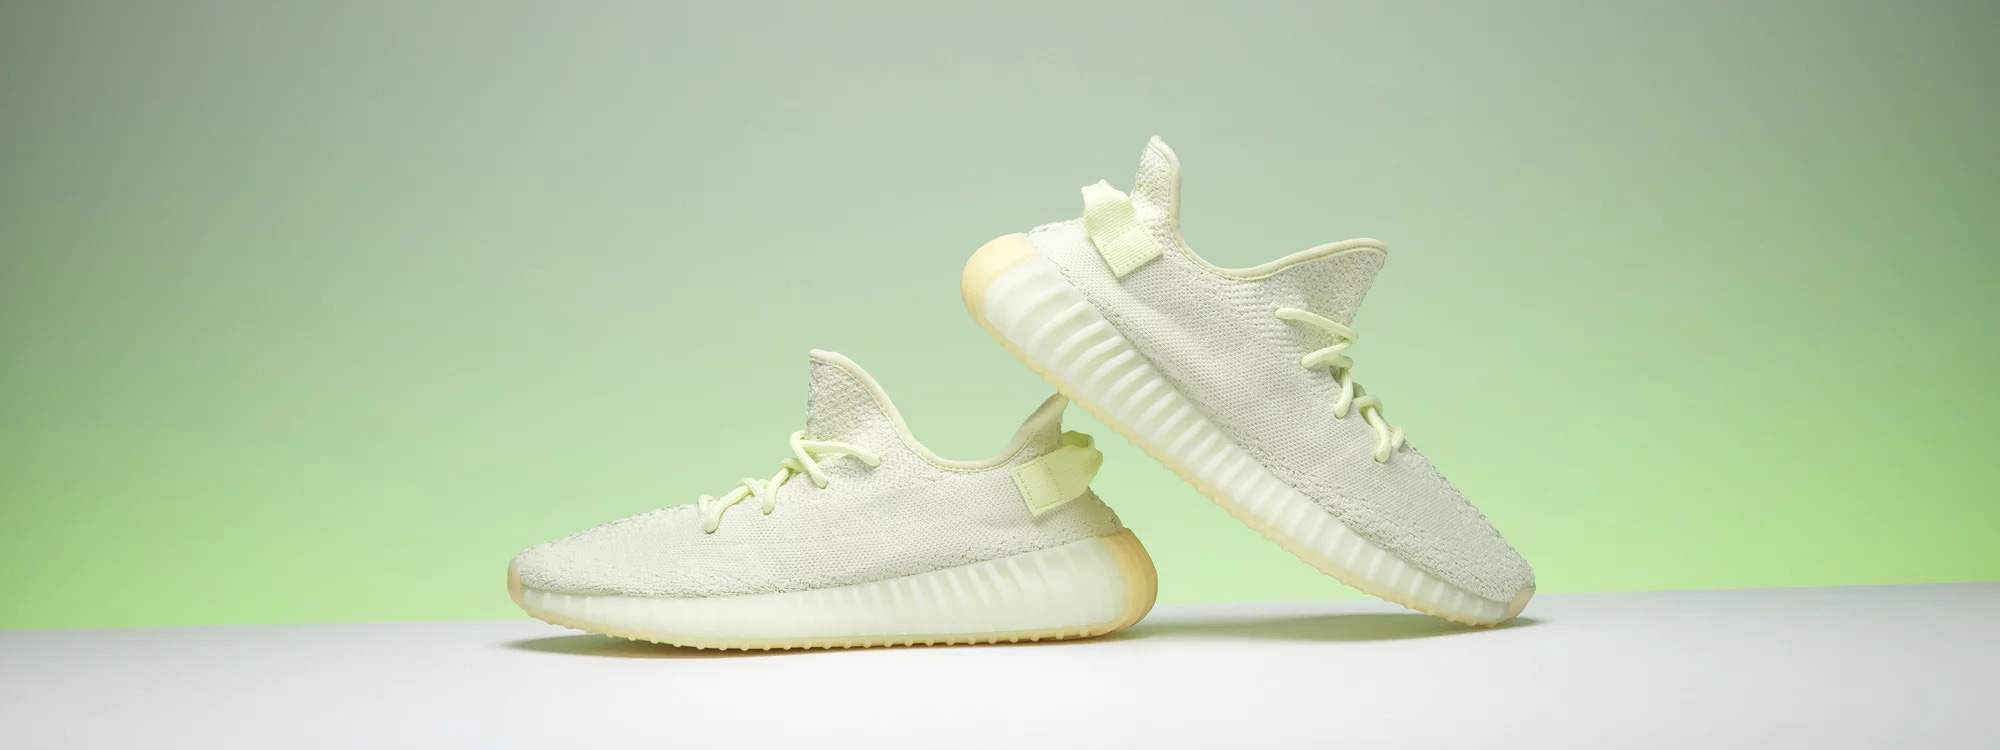 Cheap Adidas Yeezy Boost 350 V2 Butter shoes